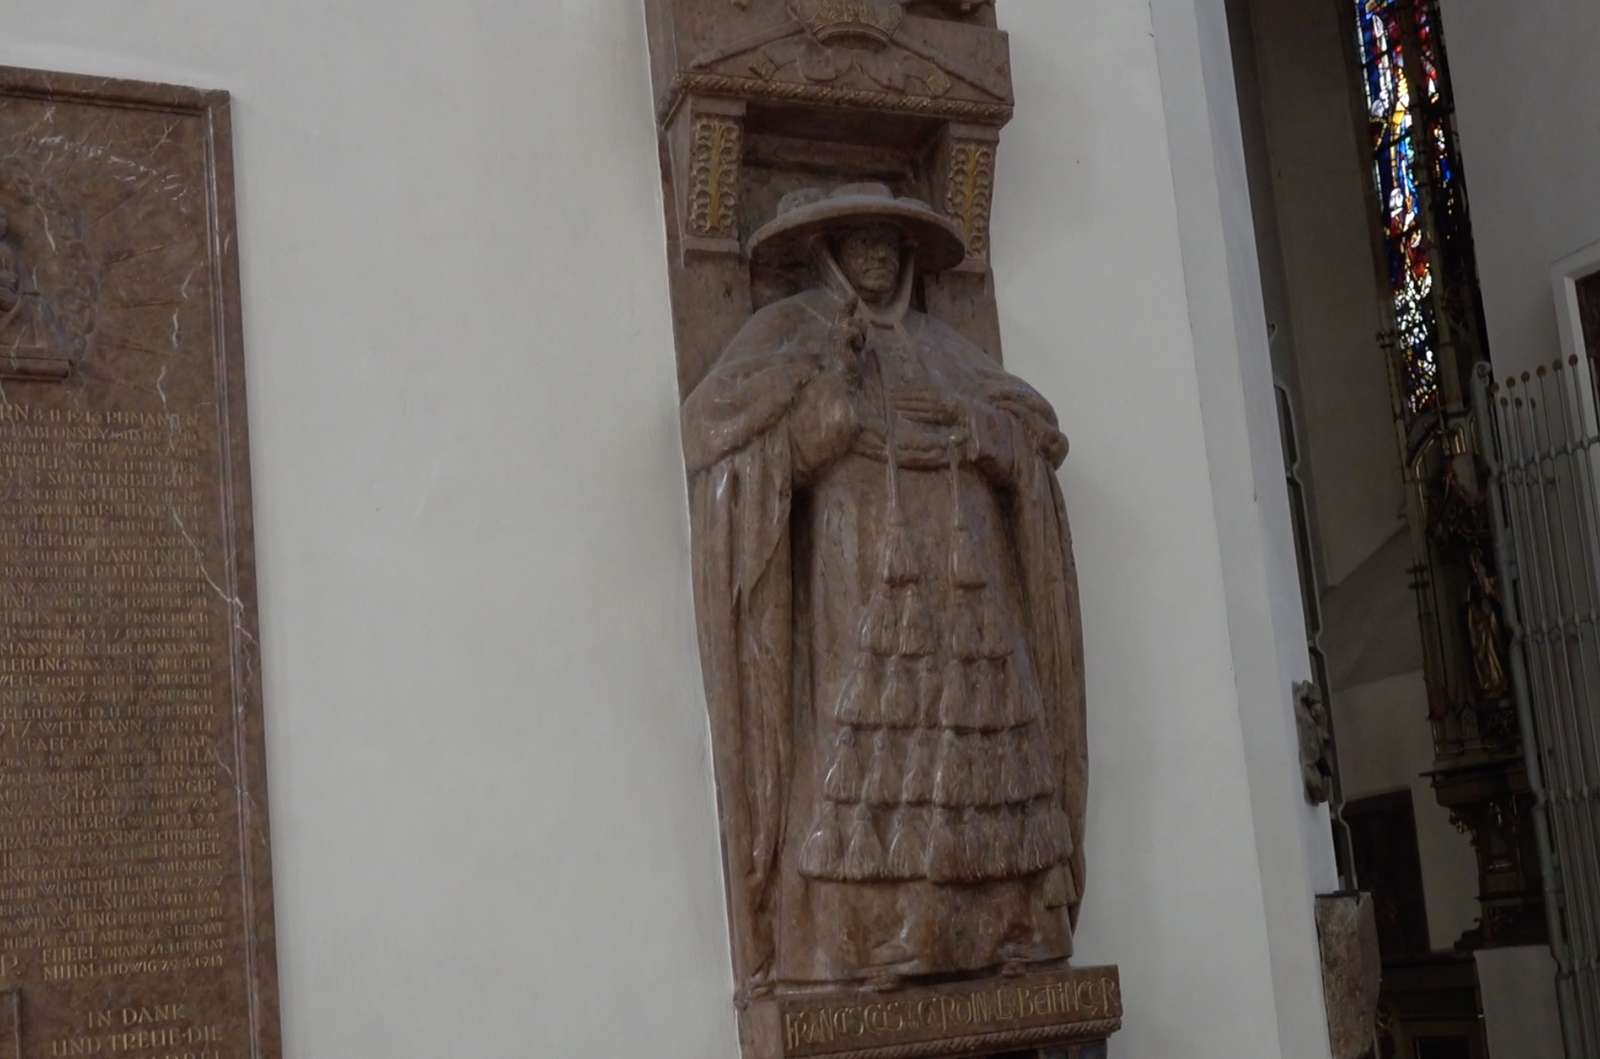 Why is there a statue of a man in Japanese clothes in the Frauenkirche Cathedral (Munich)? - My, Story, Facts, Travels, Munich, The cathedral, Why?